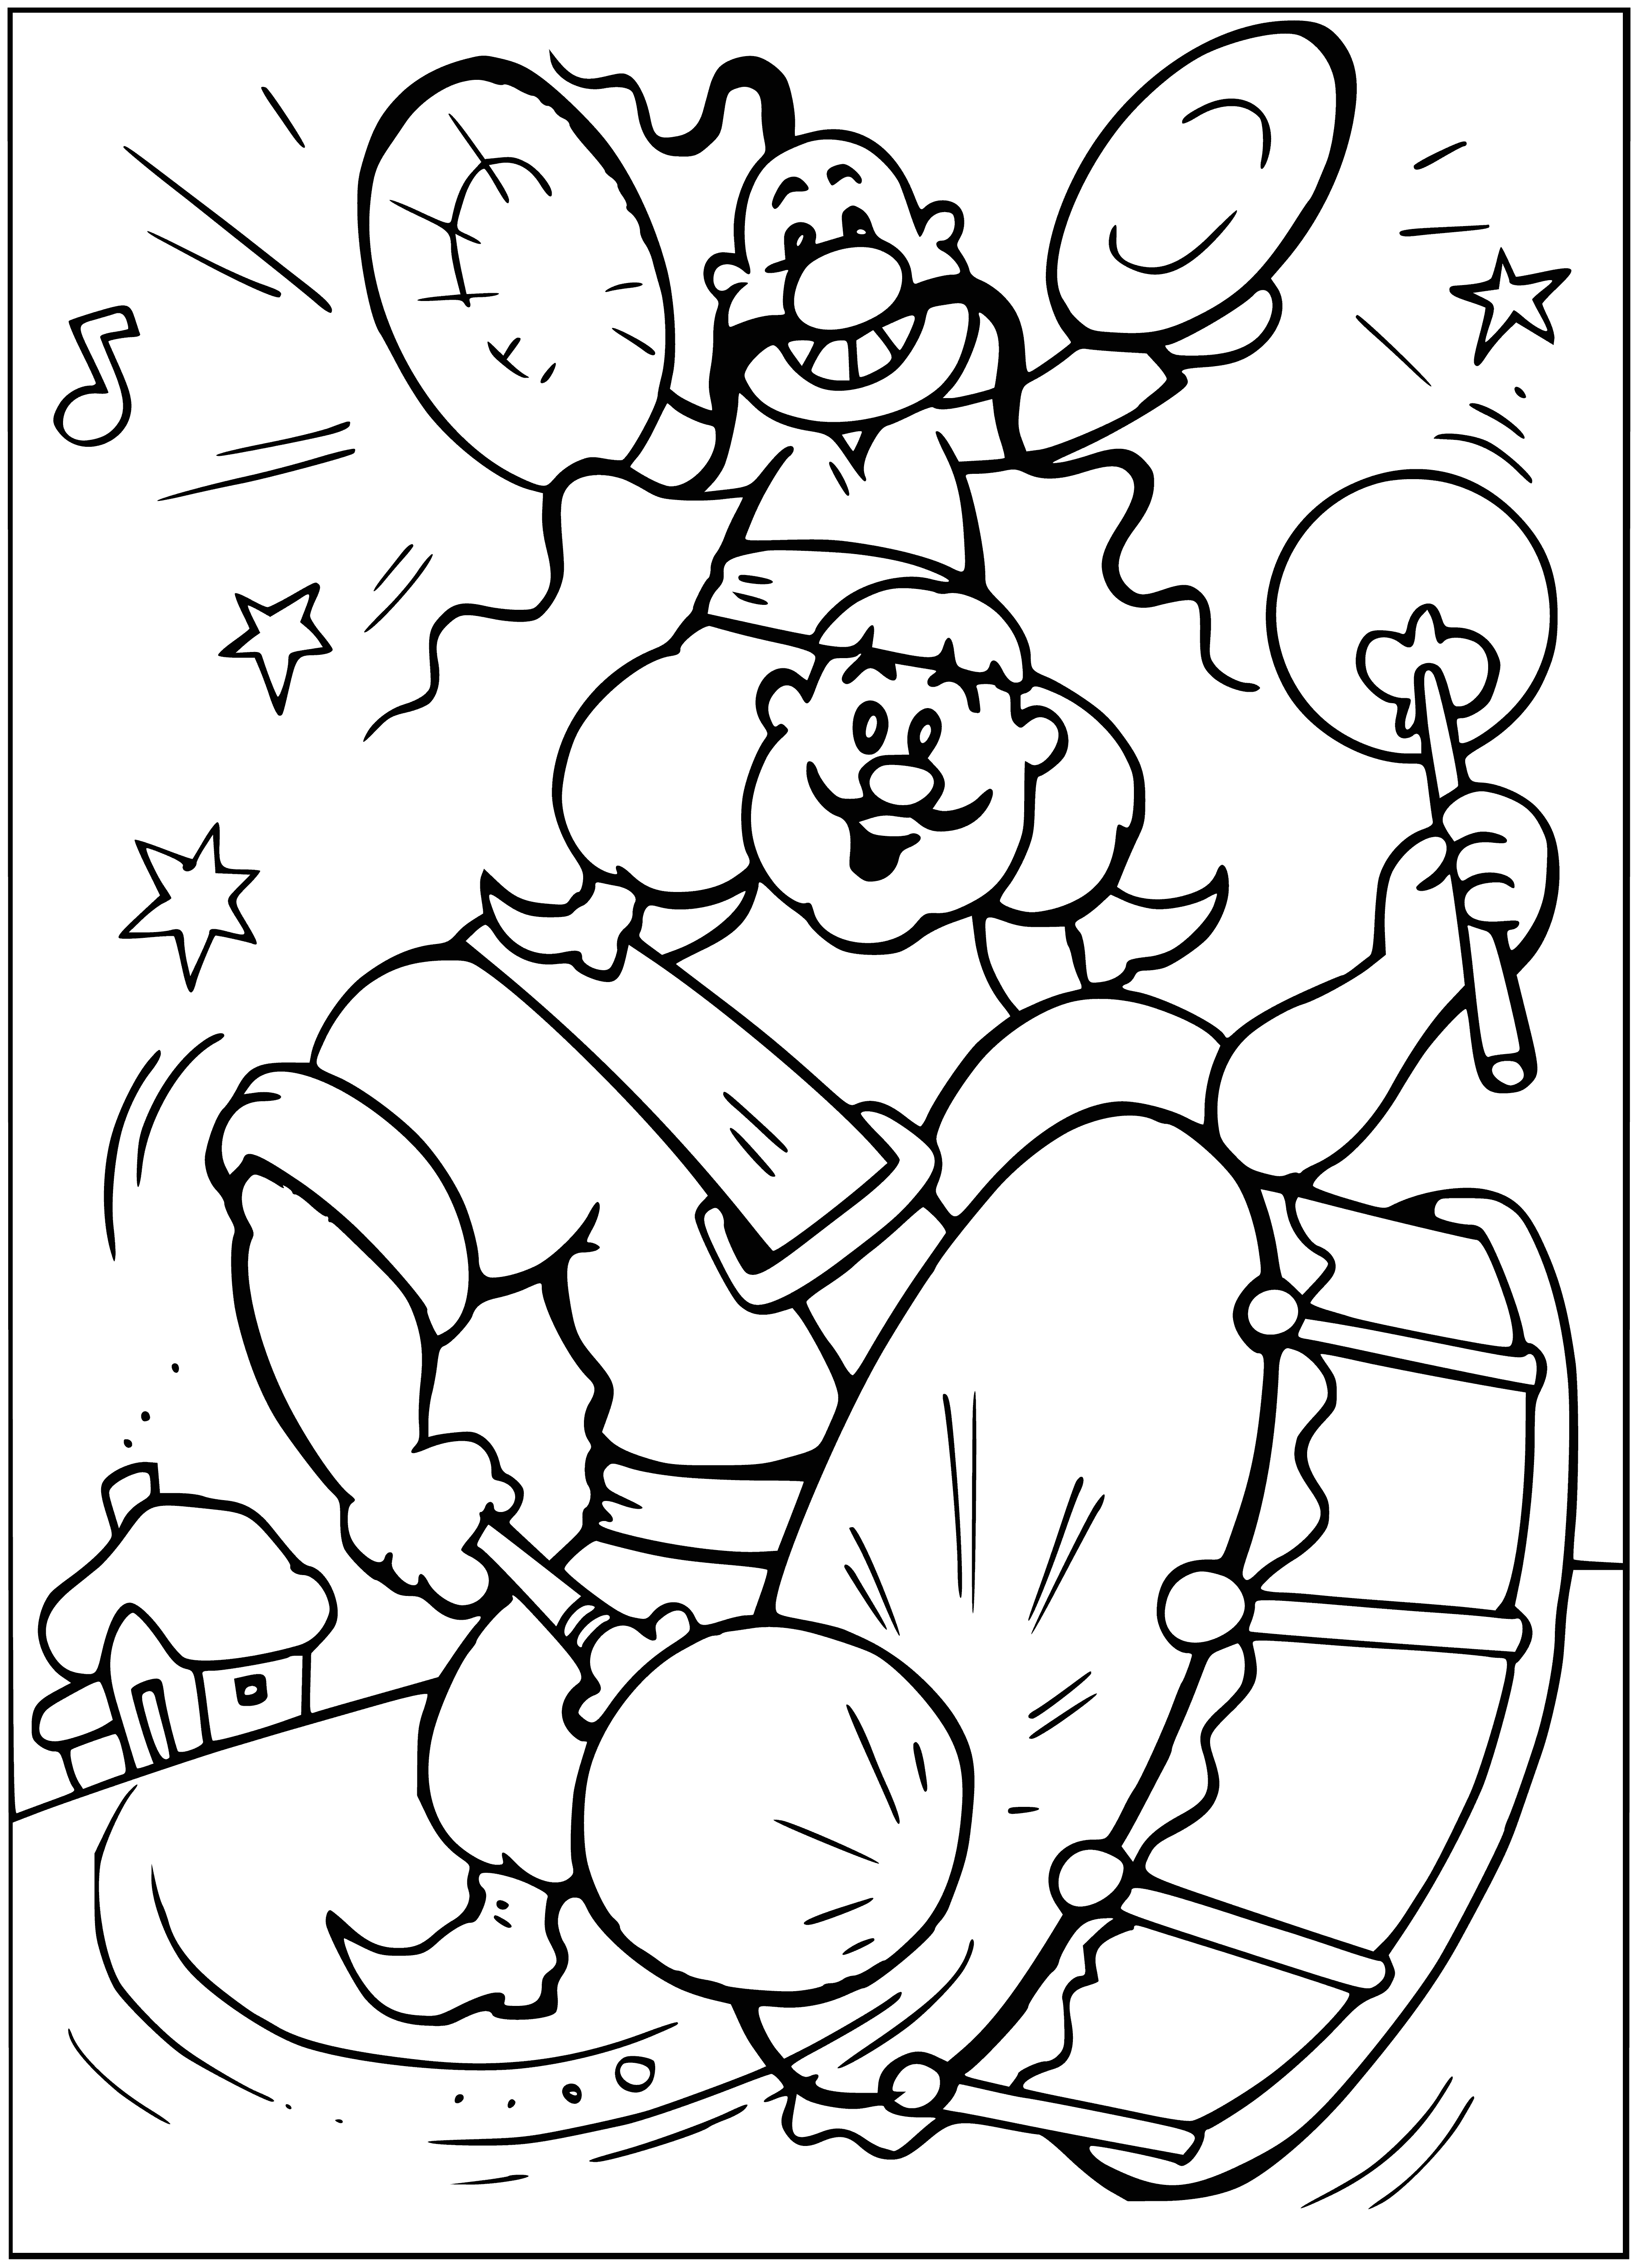 coloring page: Two Cossacks sitting on a bench, smoking and ready for a fight in their traditional clothing.